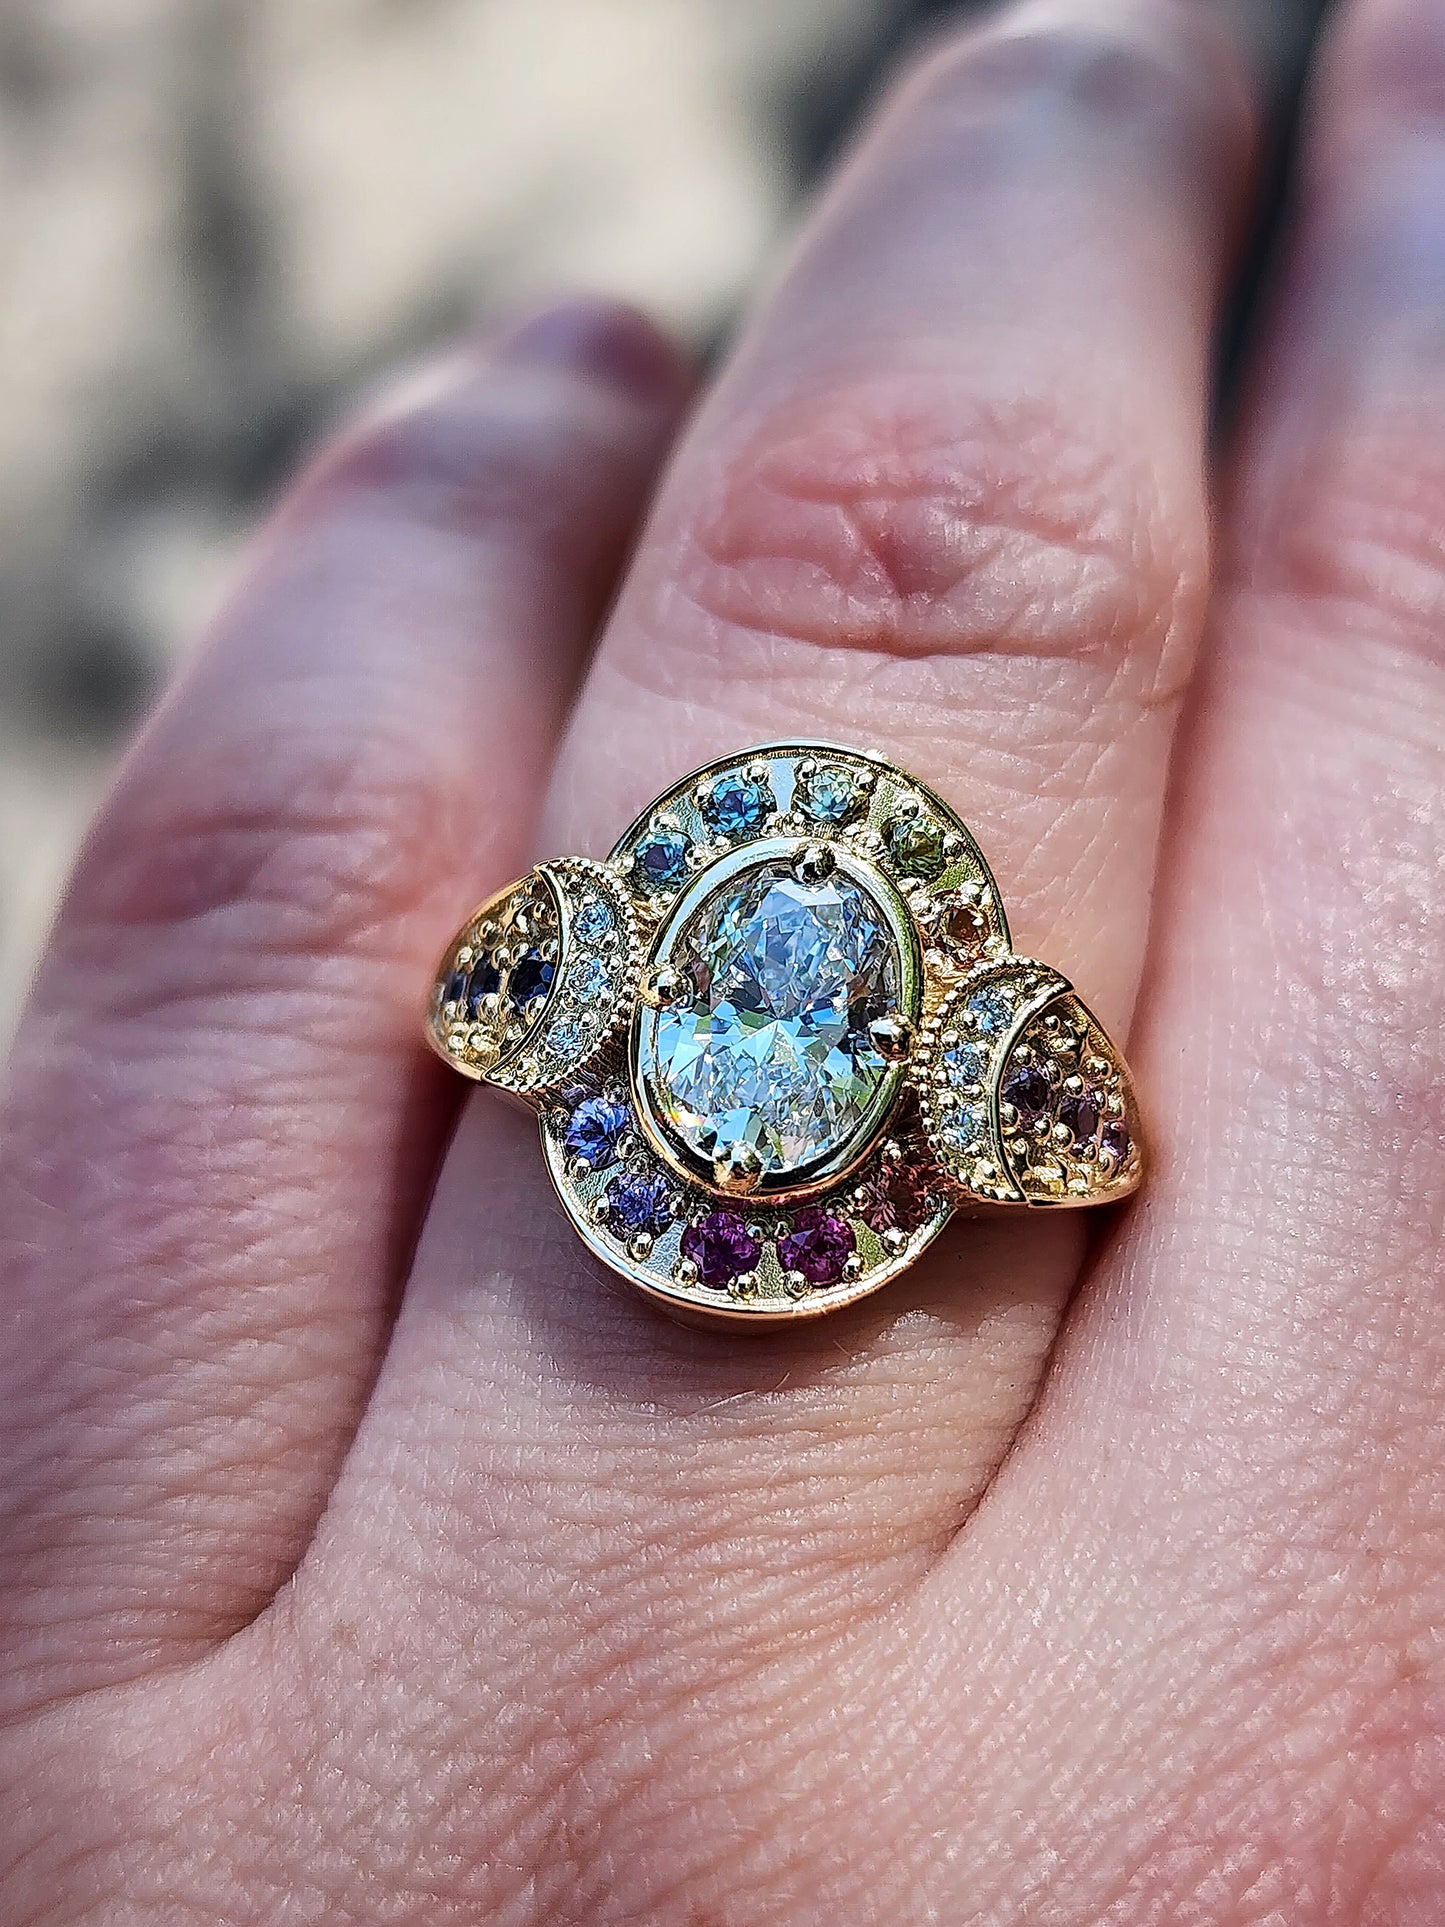 Spectrum Moon Ring with Lab Diamond Oval Natural Rainbow Sappire Halo and Gold Stardust - Modern Bohemian Eclectic Celestial Engagemet Ring - Pick your Lab Diamond or Moissanite Center Stone